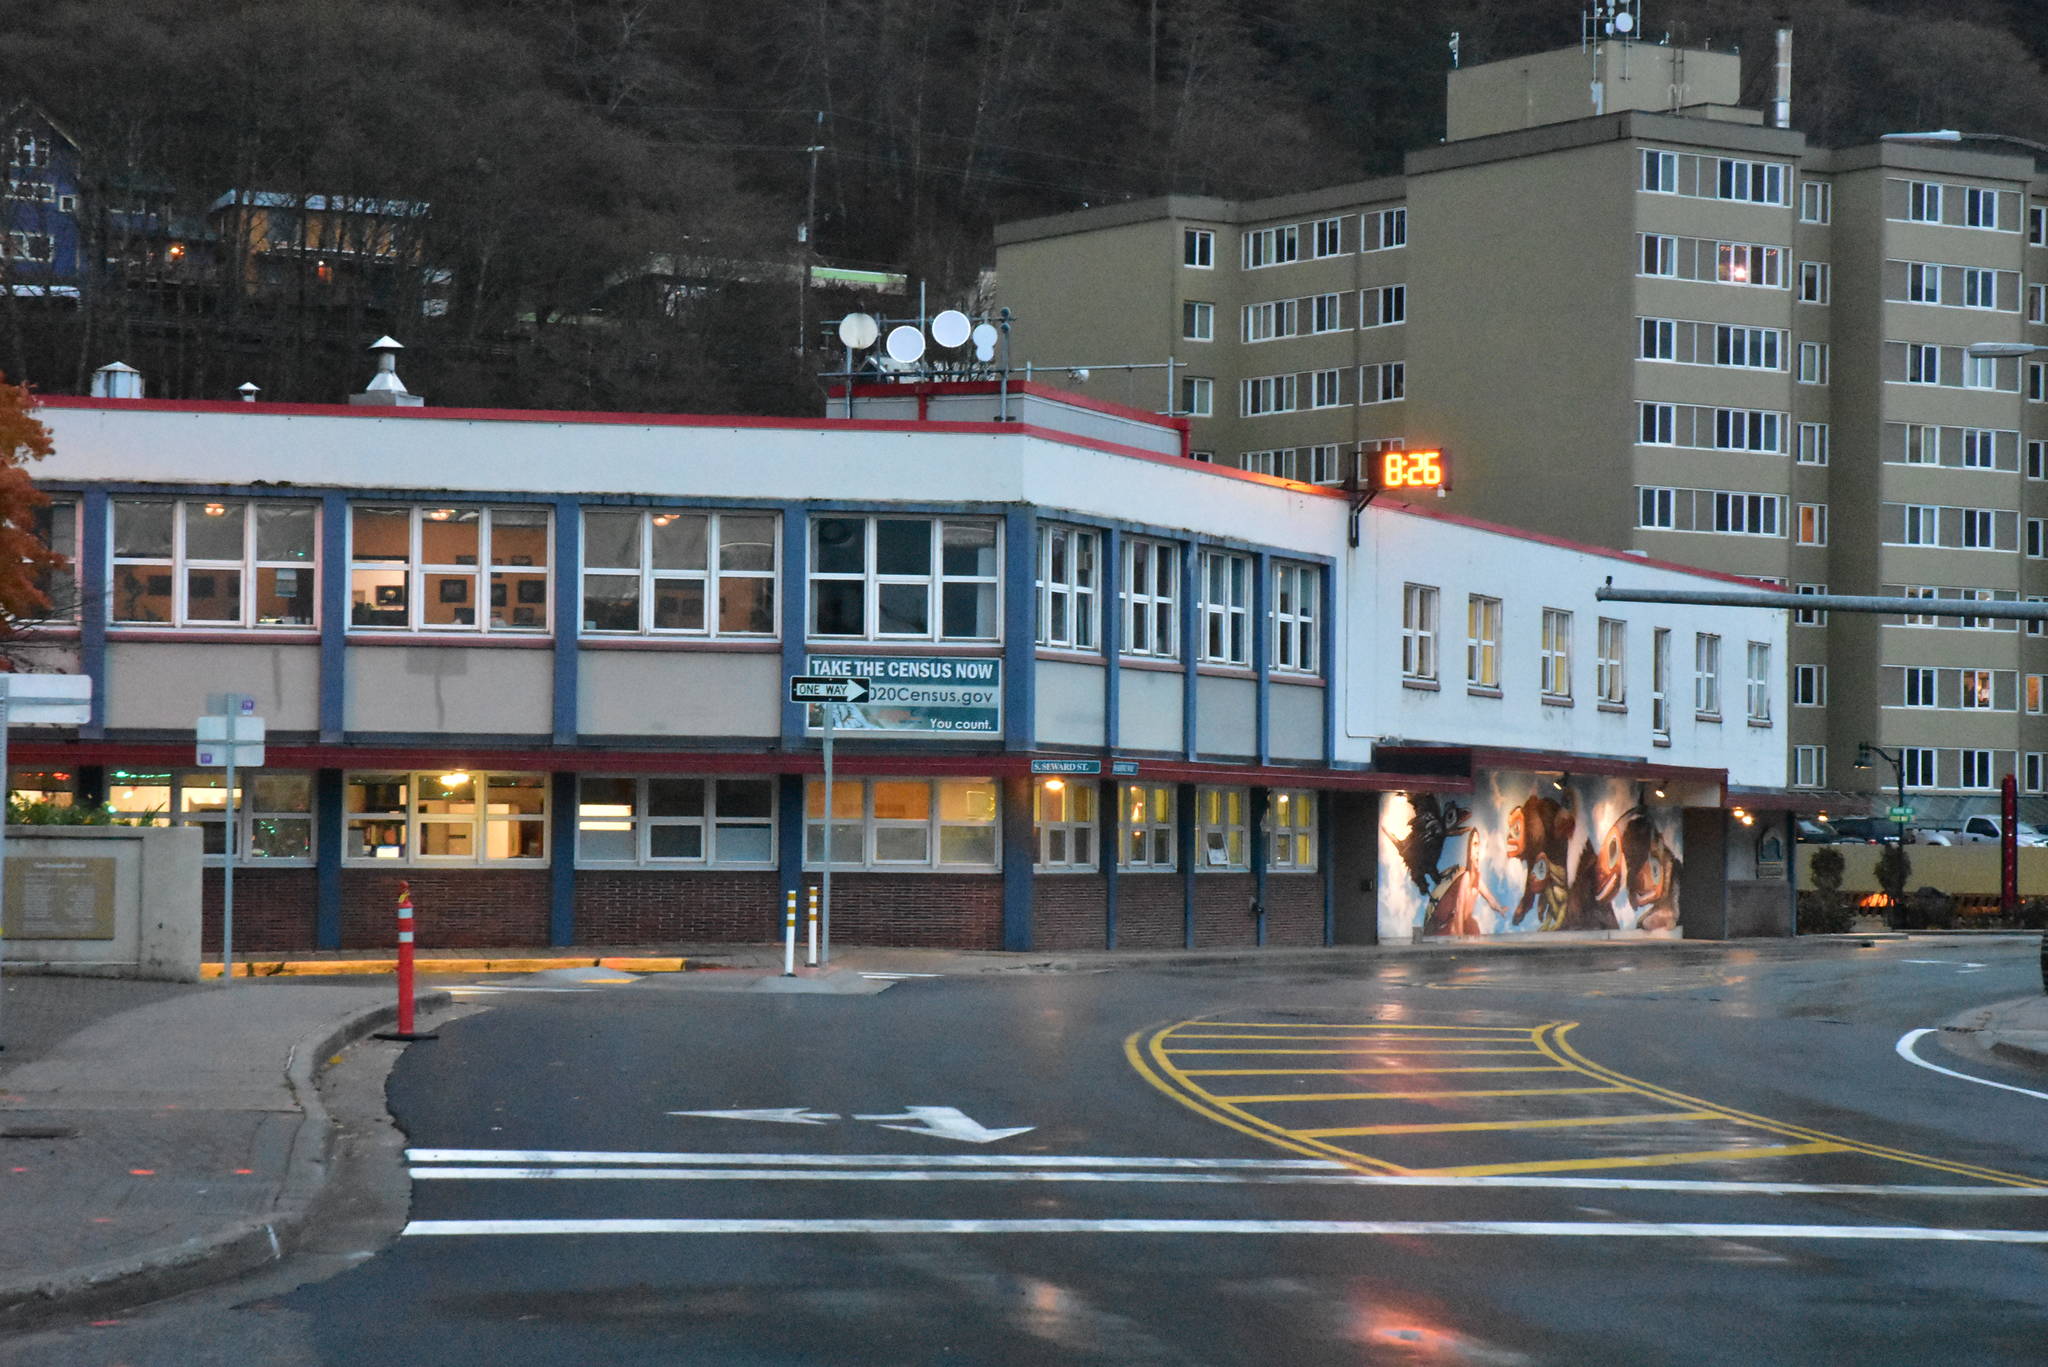 This photos shows Juneau City Hall on Tuesday. The City and Borough of Juneau passed an ordinance requiring the confidential disclosure to the city assessor's office of the sales price of real estate transactions in the borough. (Peter Segall / Juneau Empire)